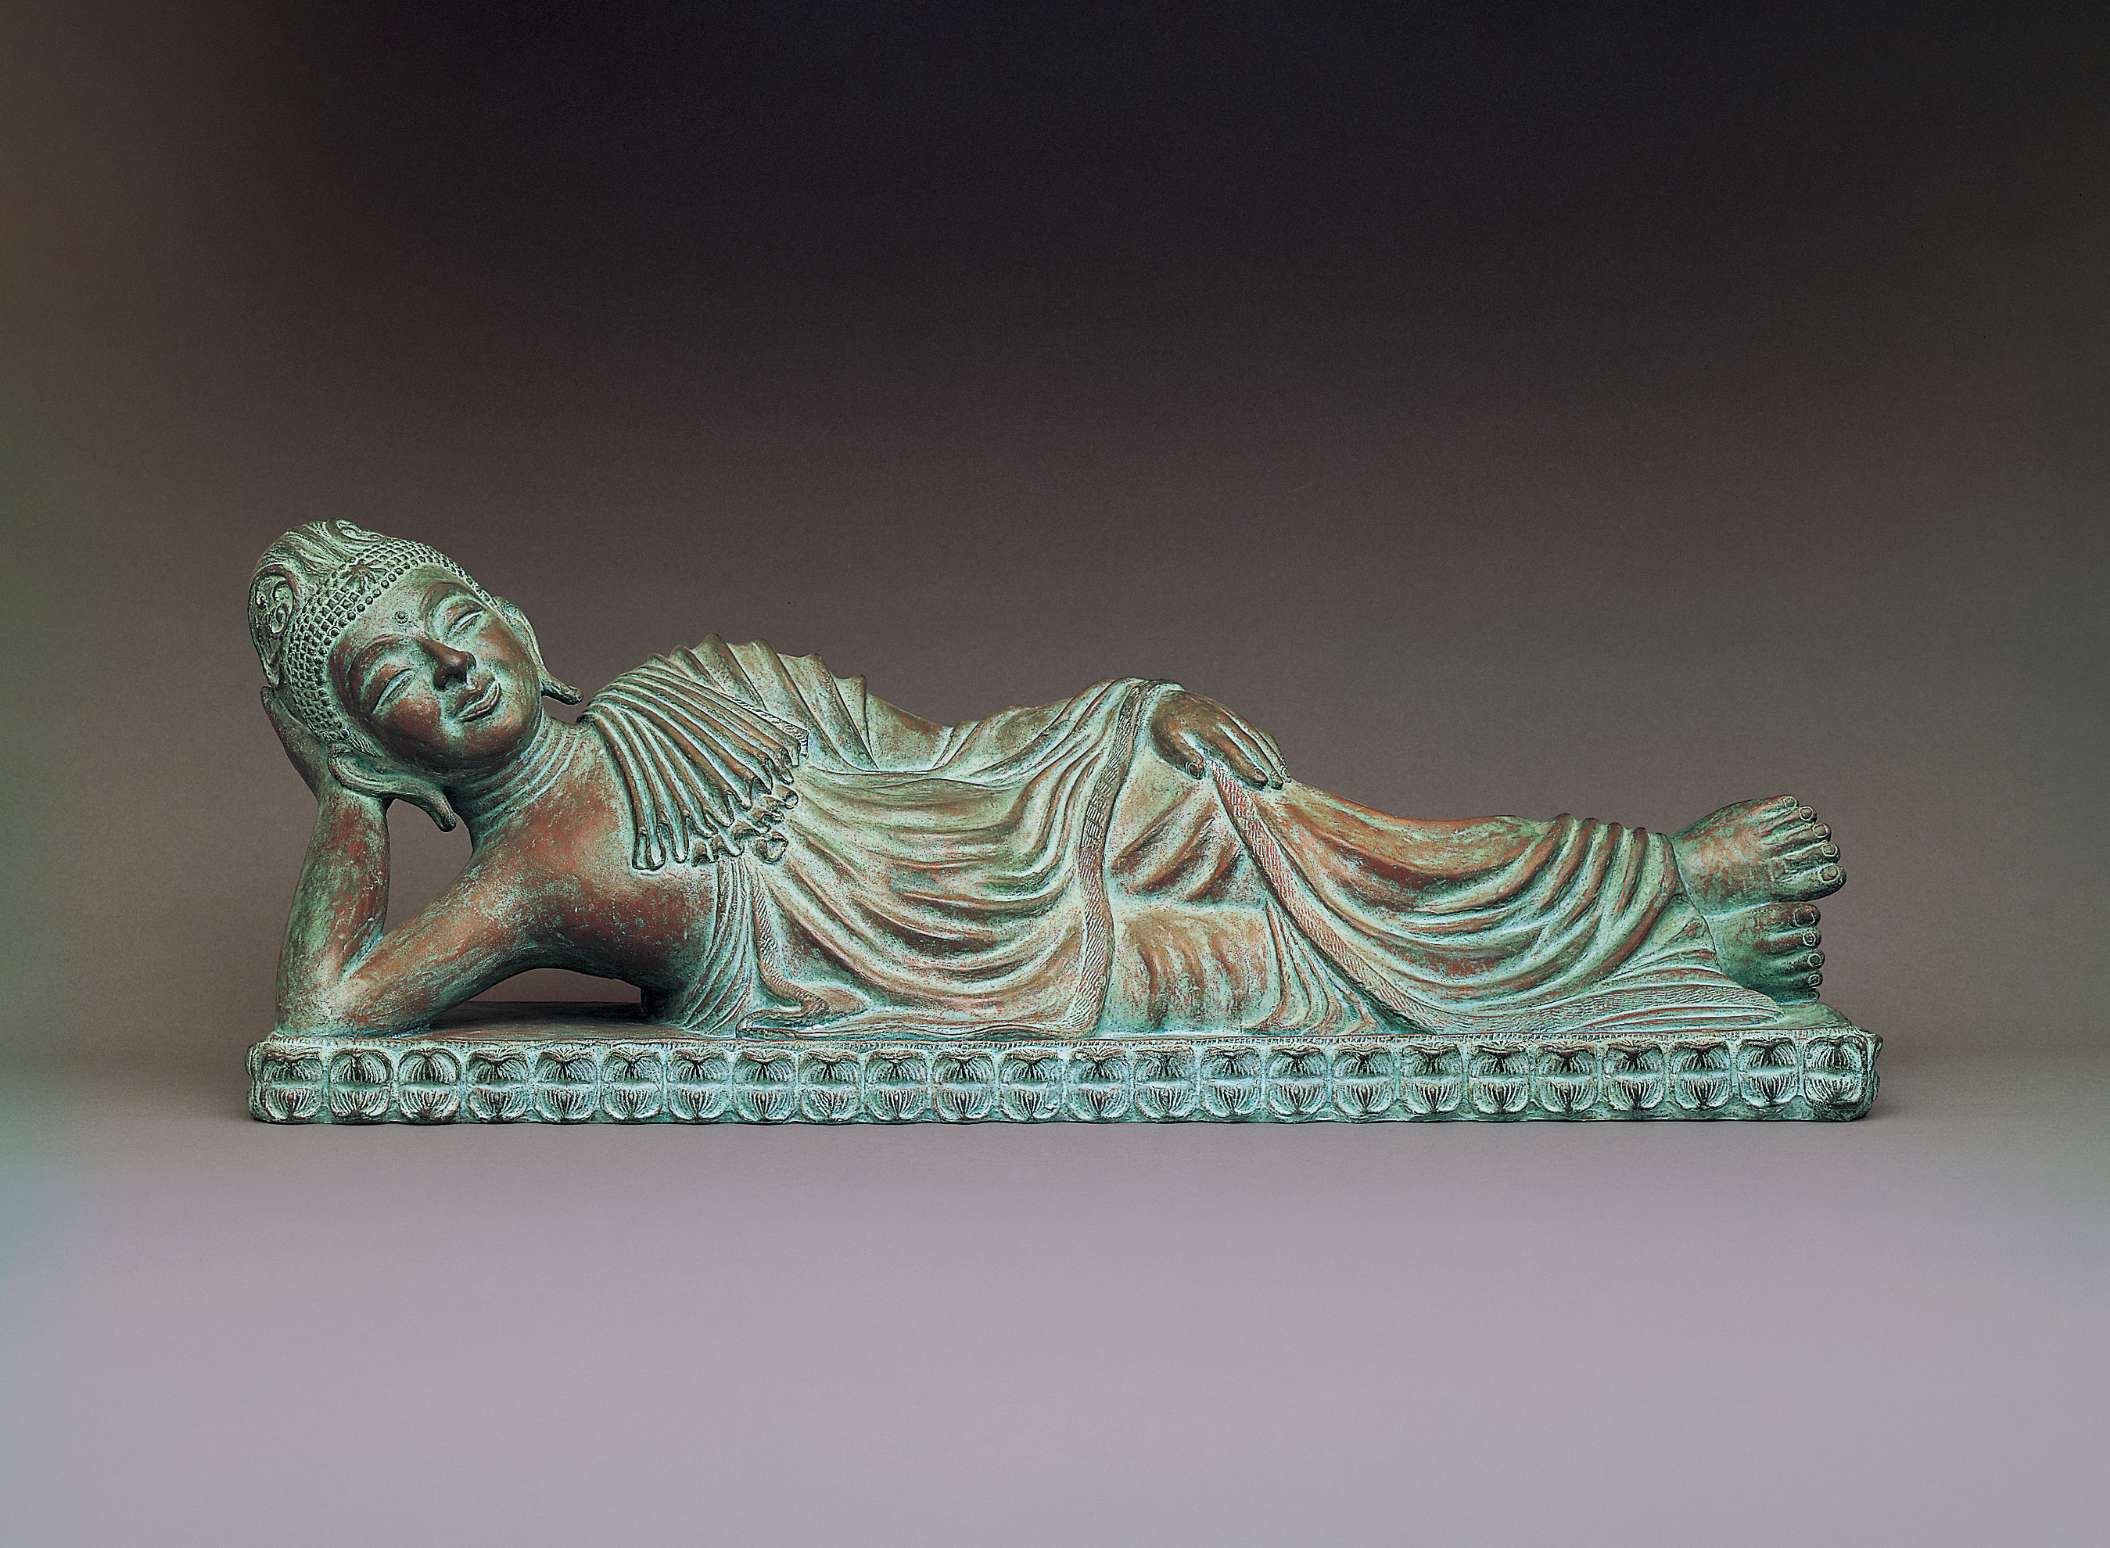 A matte metallic statue of smiling Buddha laying on his side atop a bed of decorative lotus petals, head propped up by his right arm; the drapery of his robes create a pleasing, wavelike pattern.